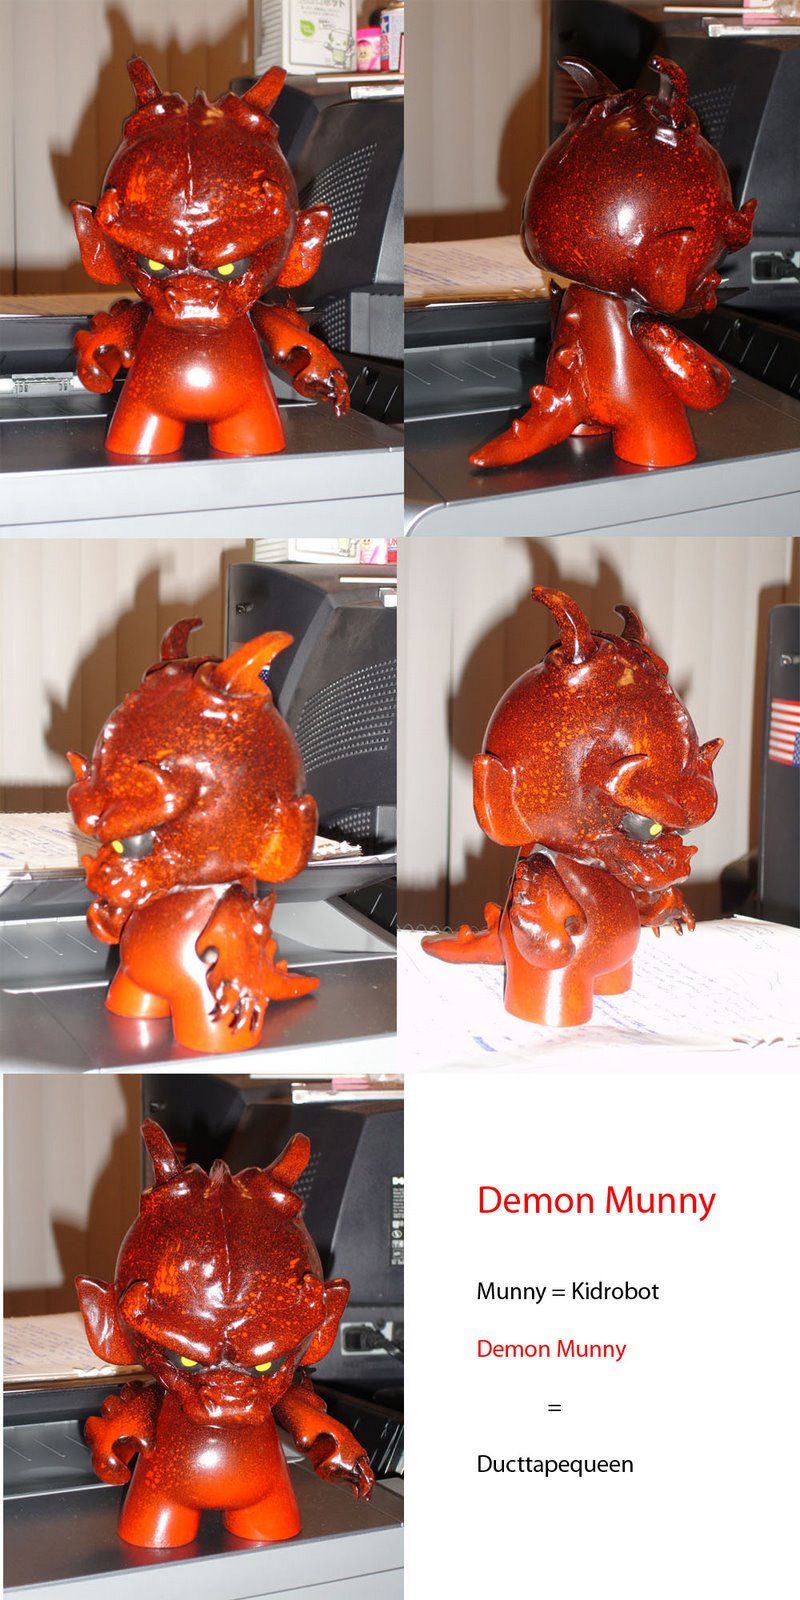 [demon+munny+pics+combined+with+flash.jpg]